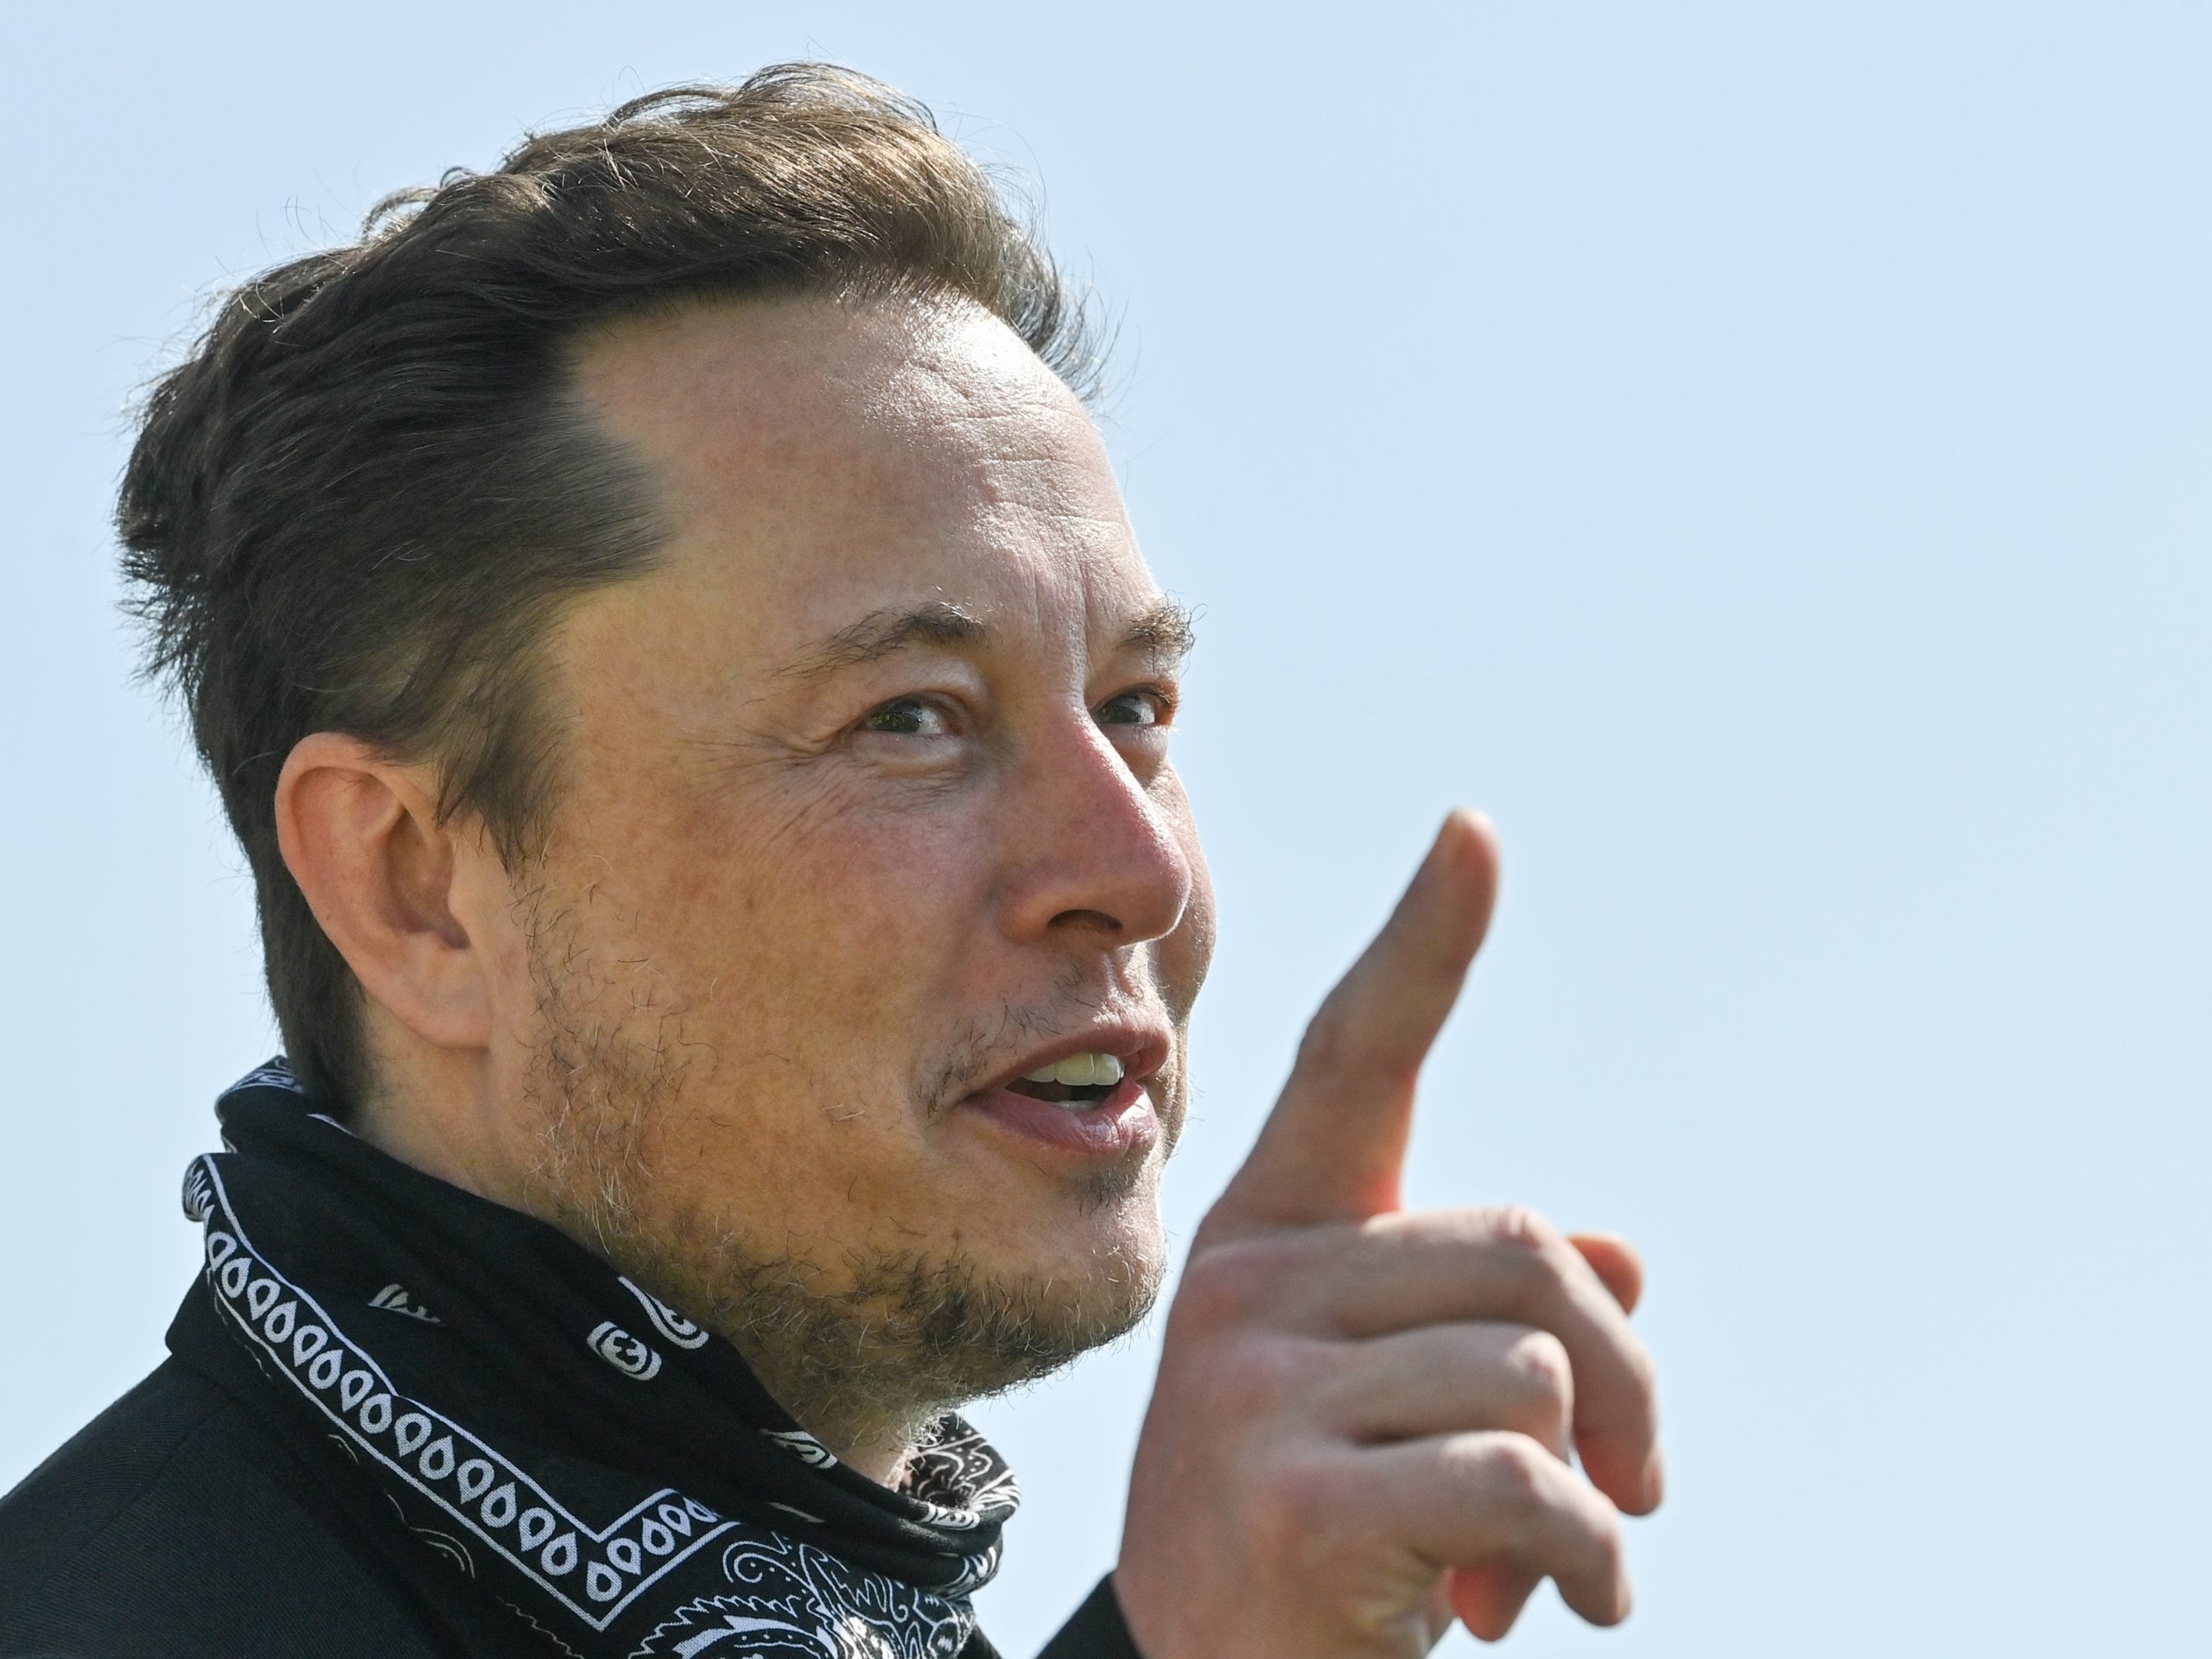 Elon Musk is able to earn the average UK salary within two minutes